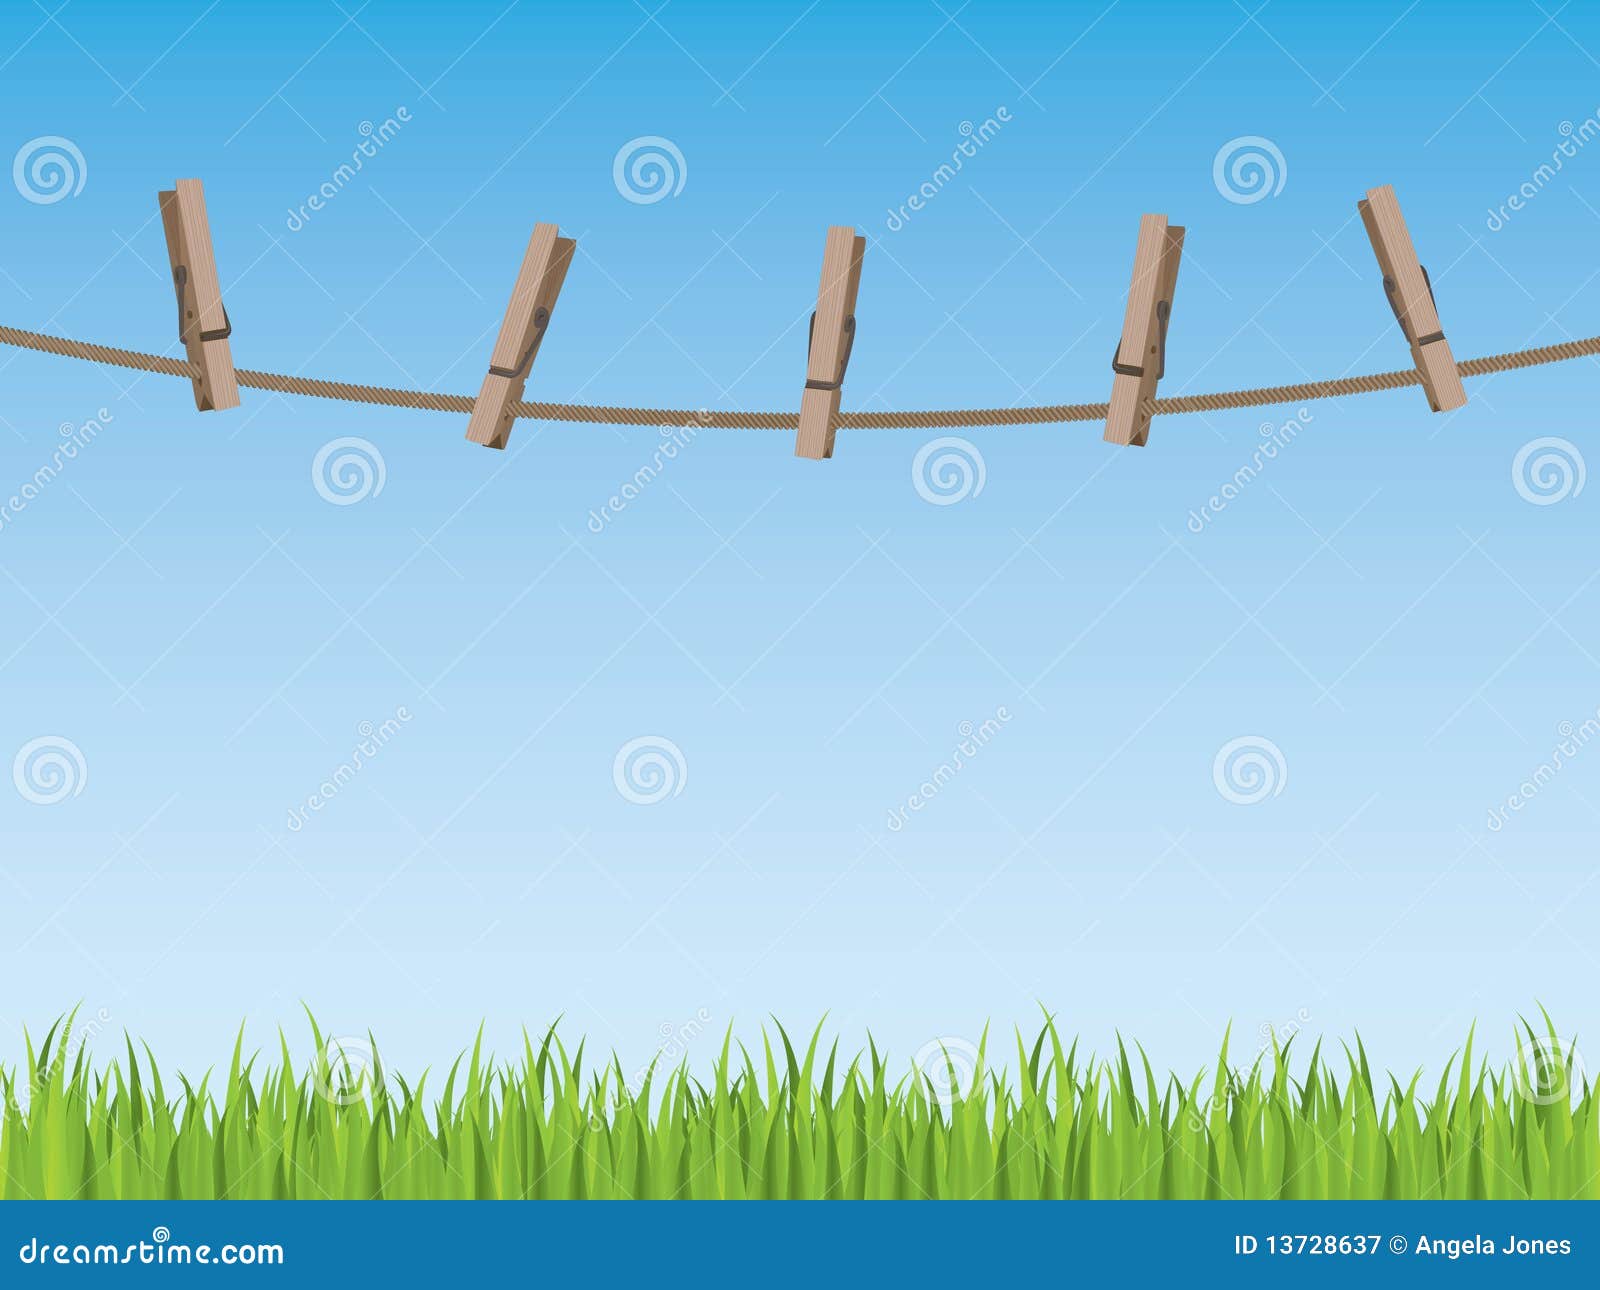 Clothes line background stock illustration. Illustration of field - 13728637